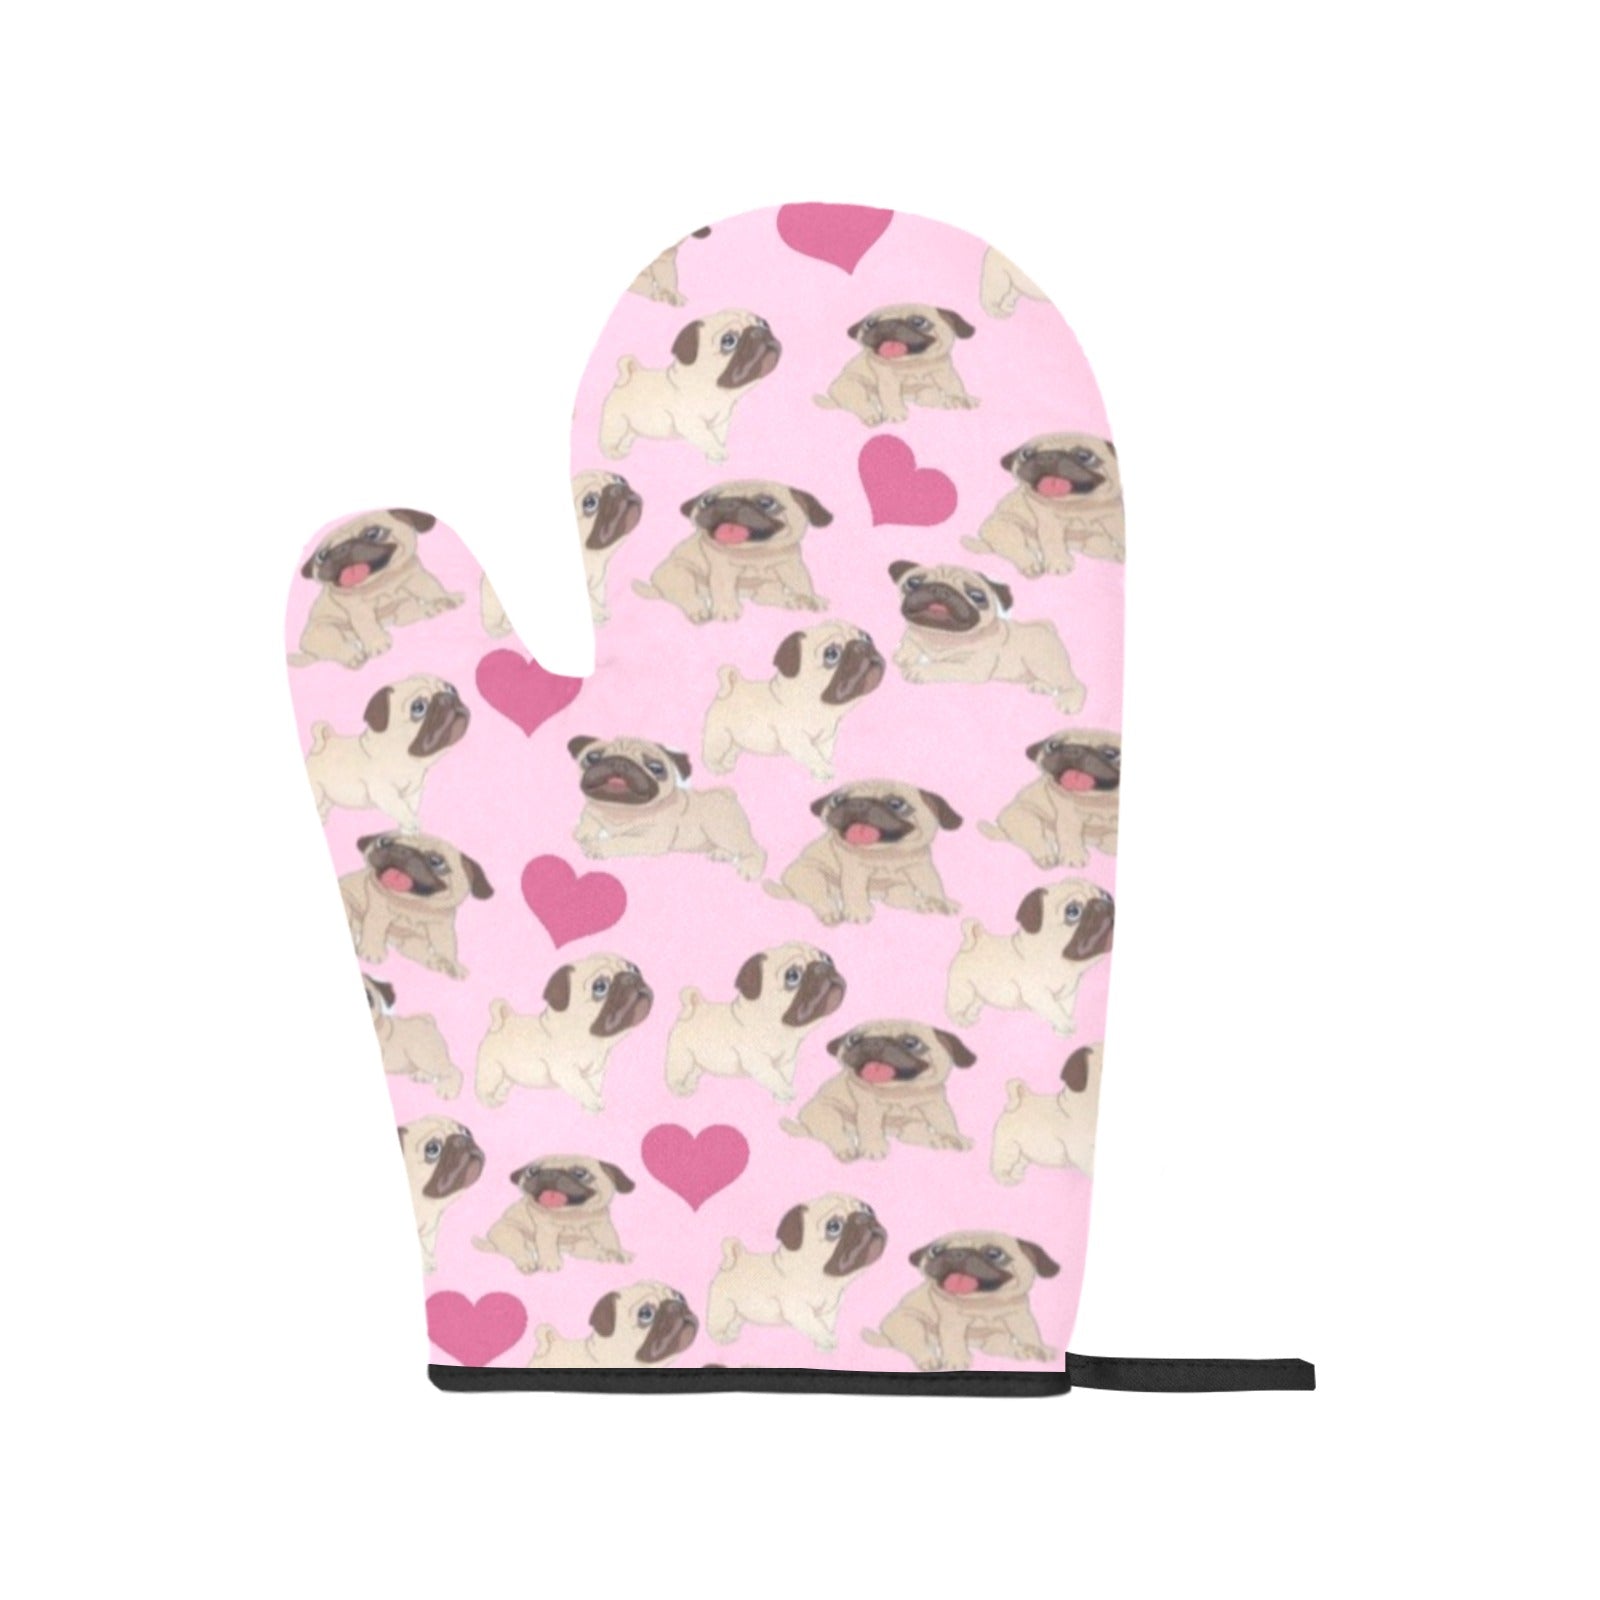 Pug Oven Mitts & Pot Holders (4 Piece Set)